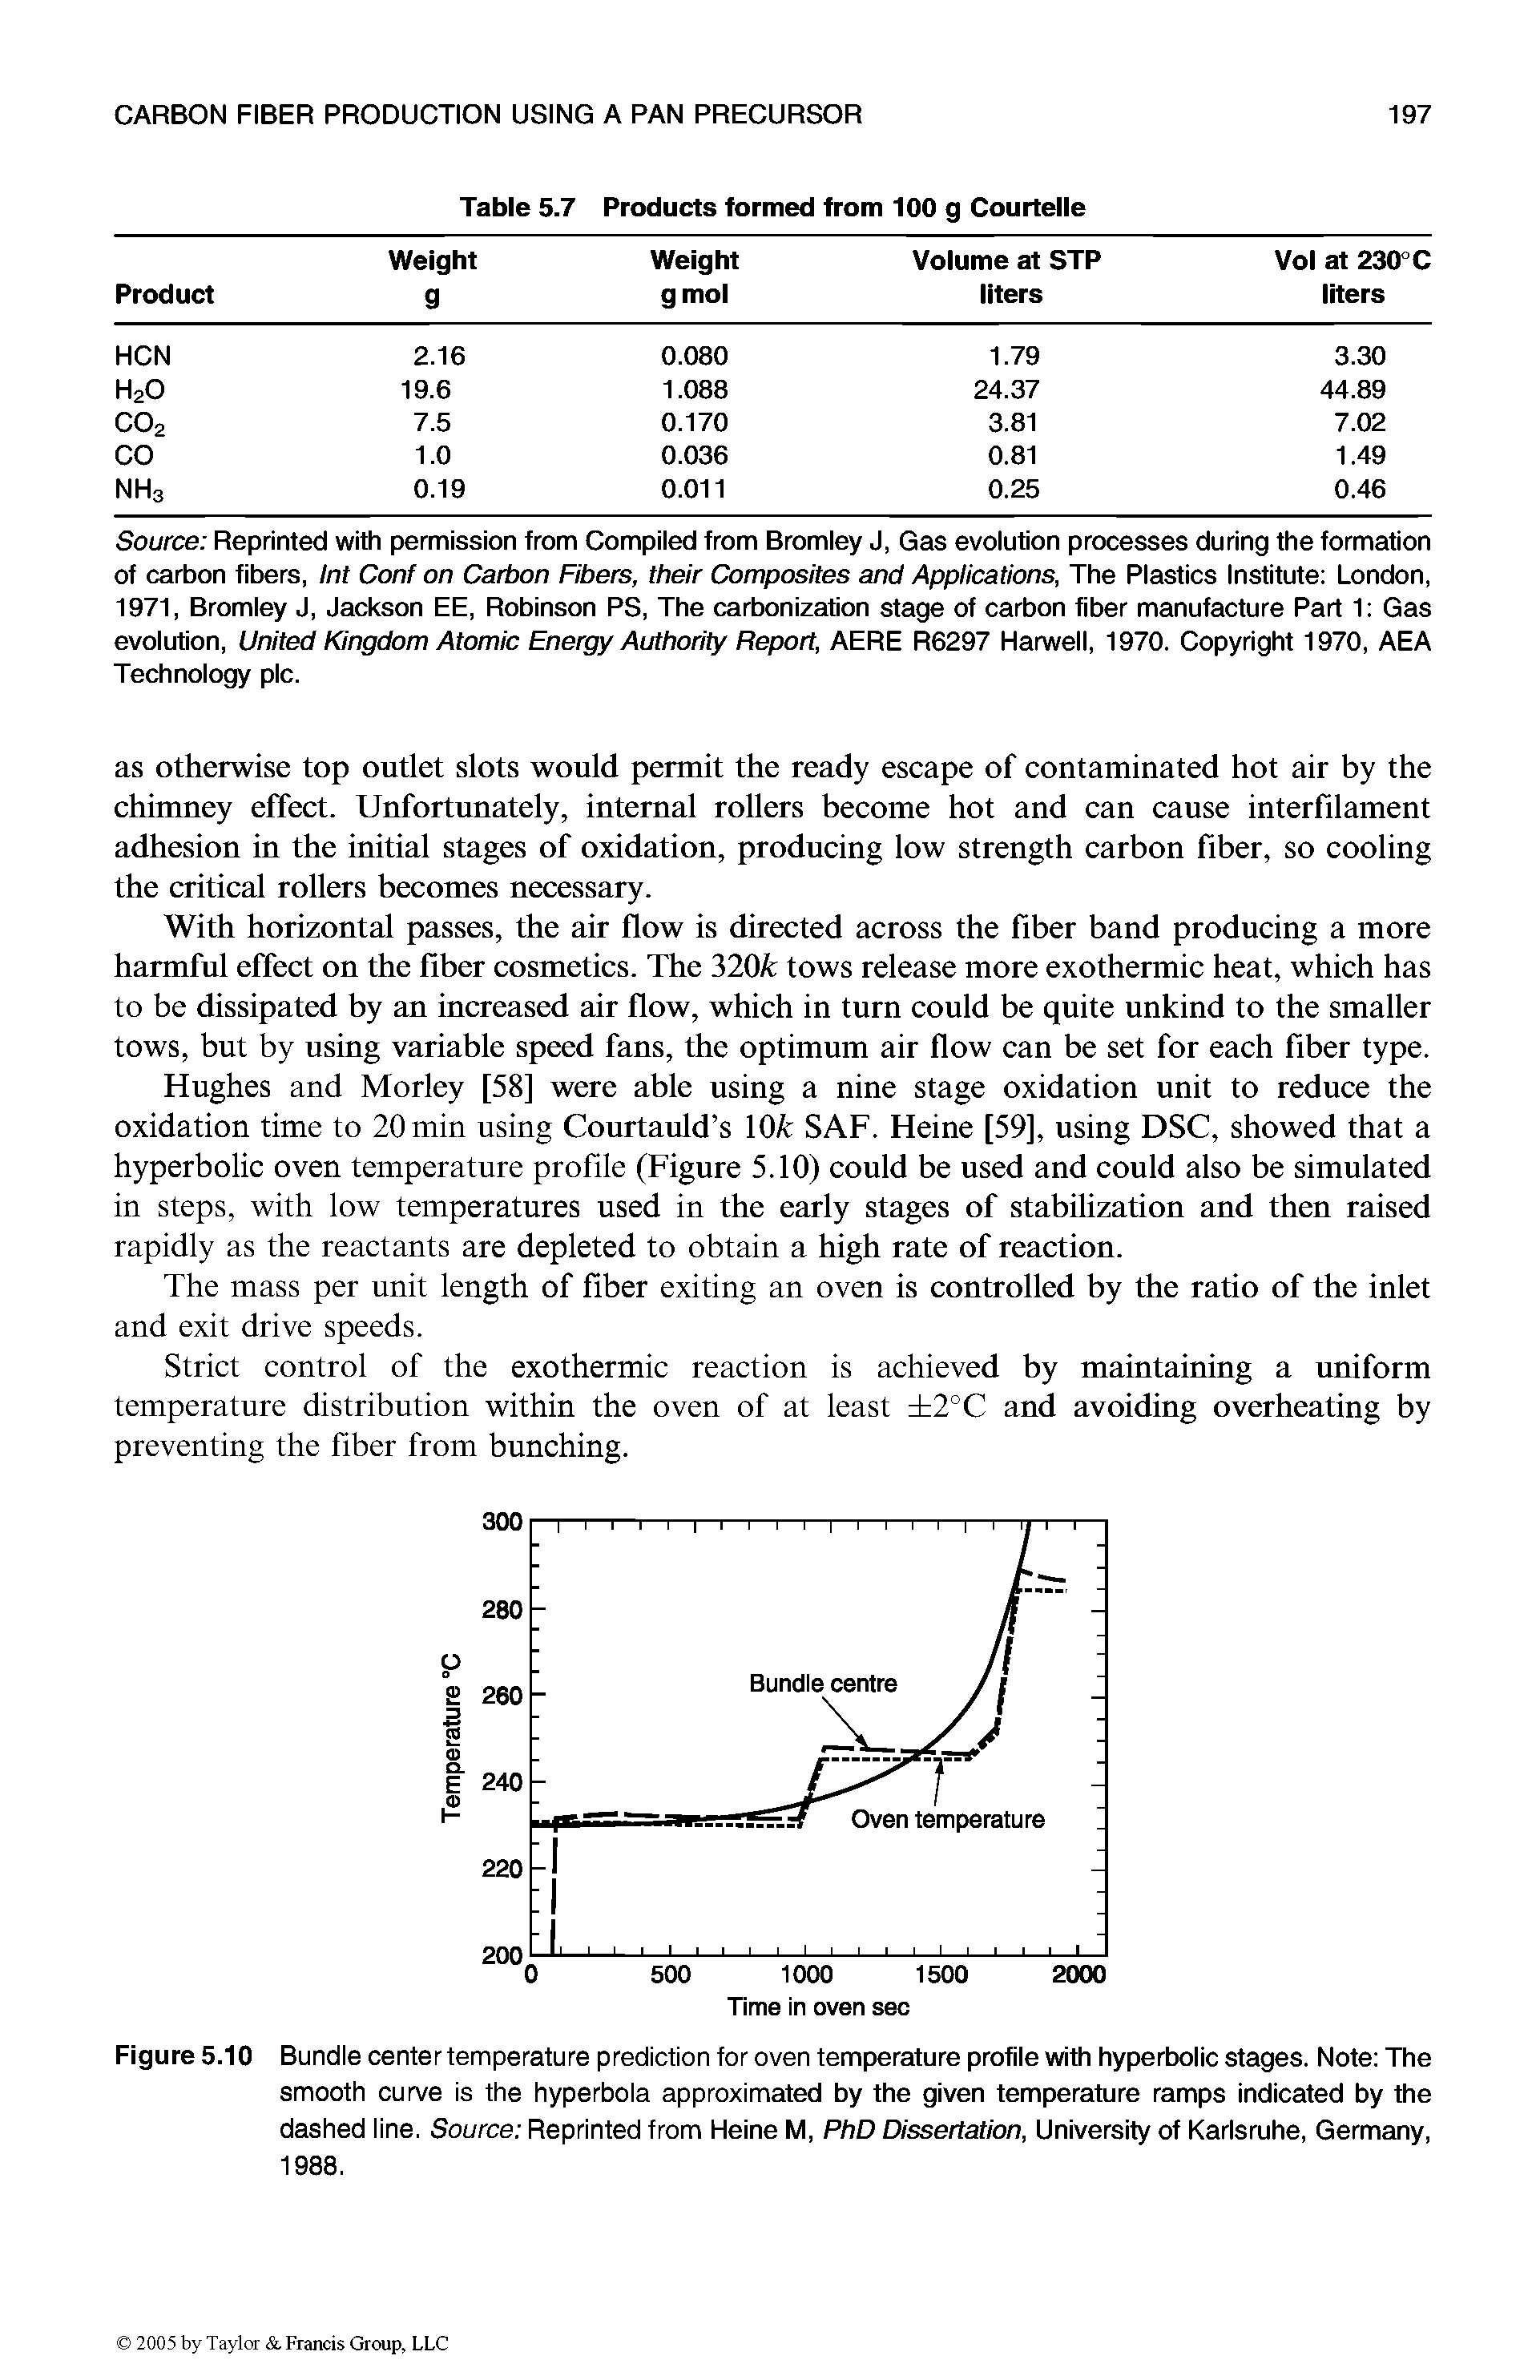 Figure 5.10 Bundle center temperature prediction for oven temperature profile with hyperbolic stages. Note The smooth curve is the hyperbola approximated by the given temperature ramps indicated by the dashed line. Source Reprinted from Heine M, PhD Dissertation, University of Karlsruhe, Germany, 1988.